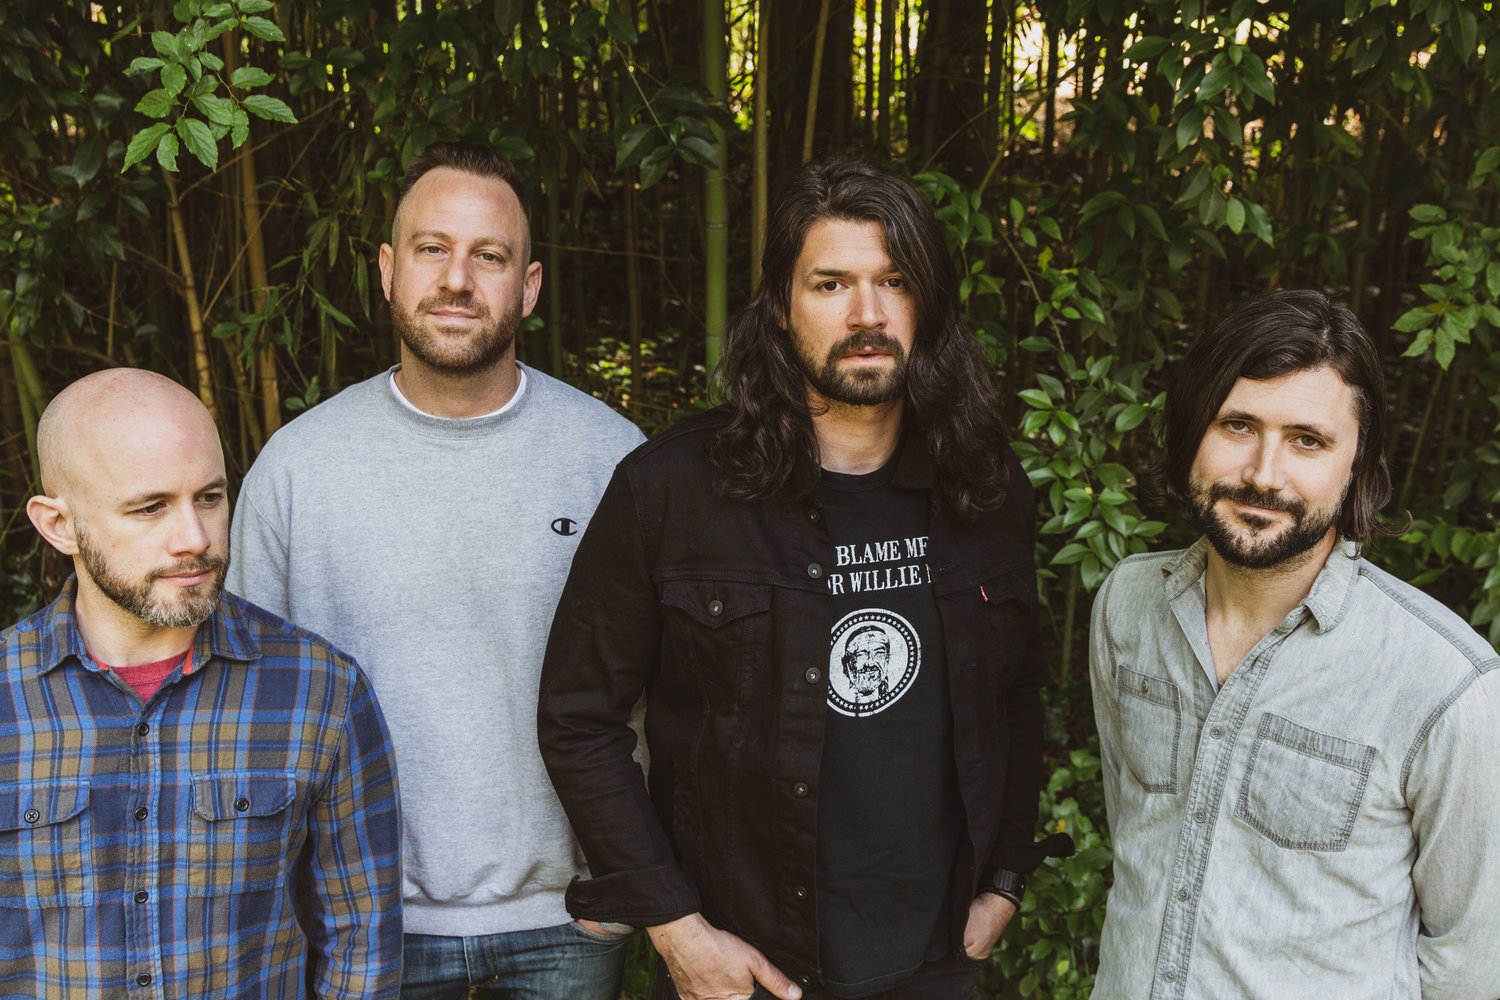 Shaun Cooper, far left, Mark O’Connell, Adam Lazzara and John Nolan make up Taking Back Sunday, which will headline a show at R.J. Daniels in Rockville Centre on Monday night.